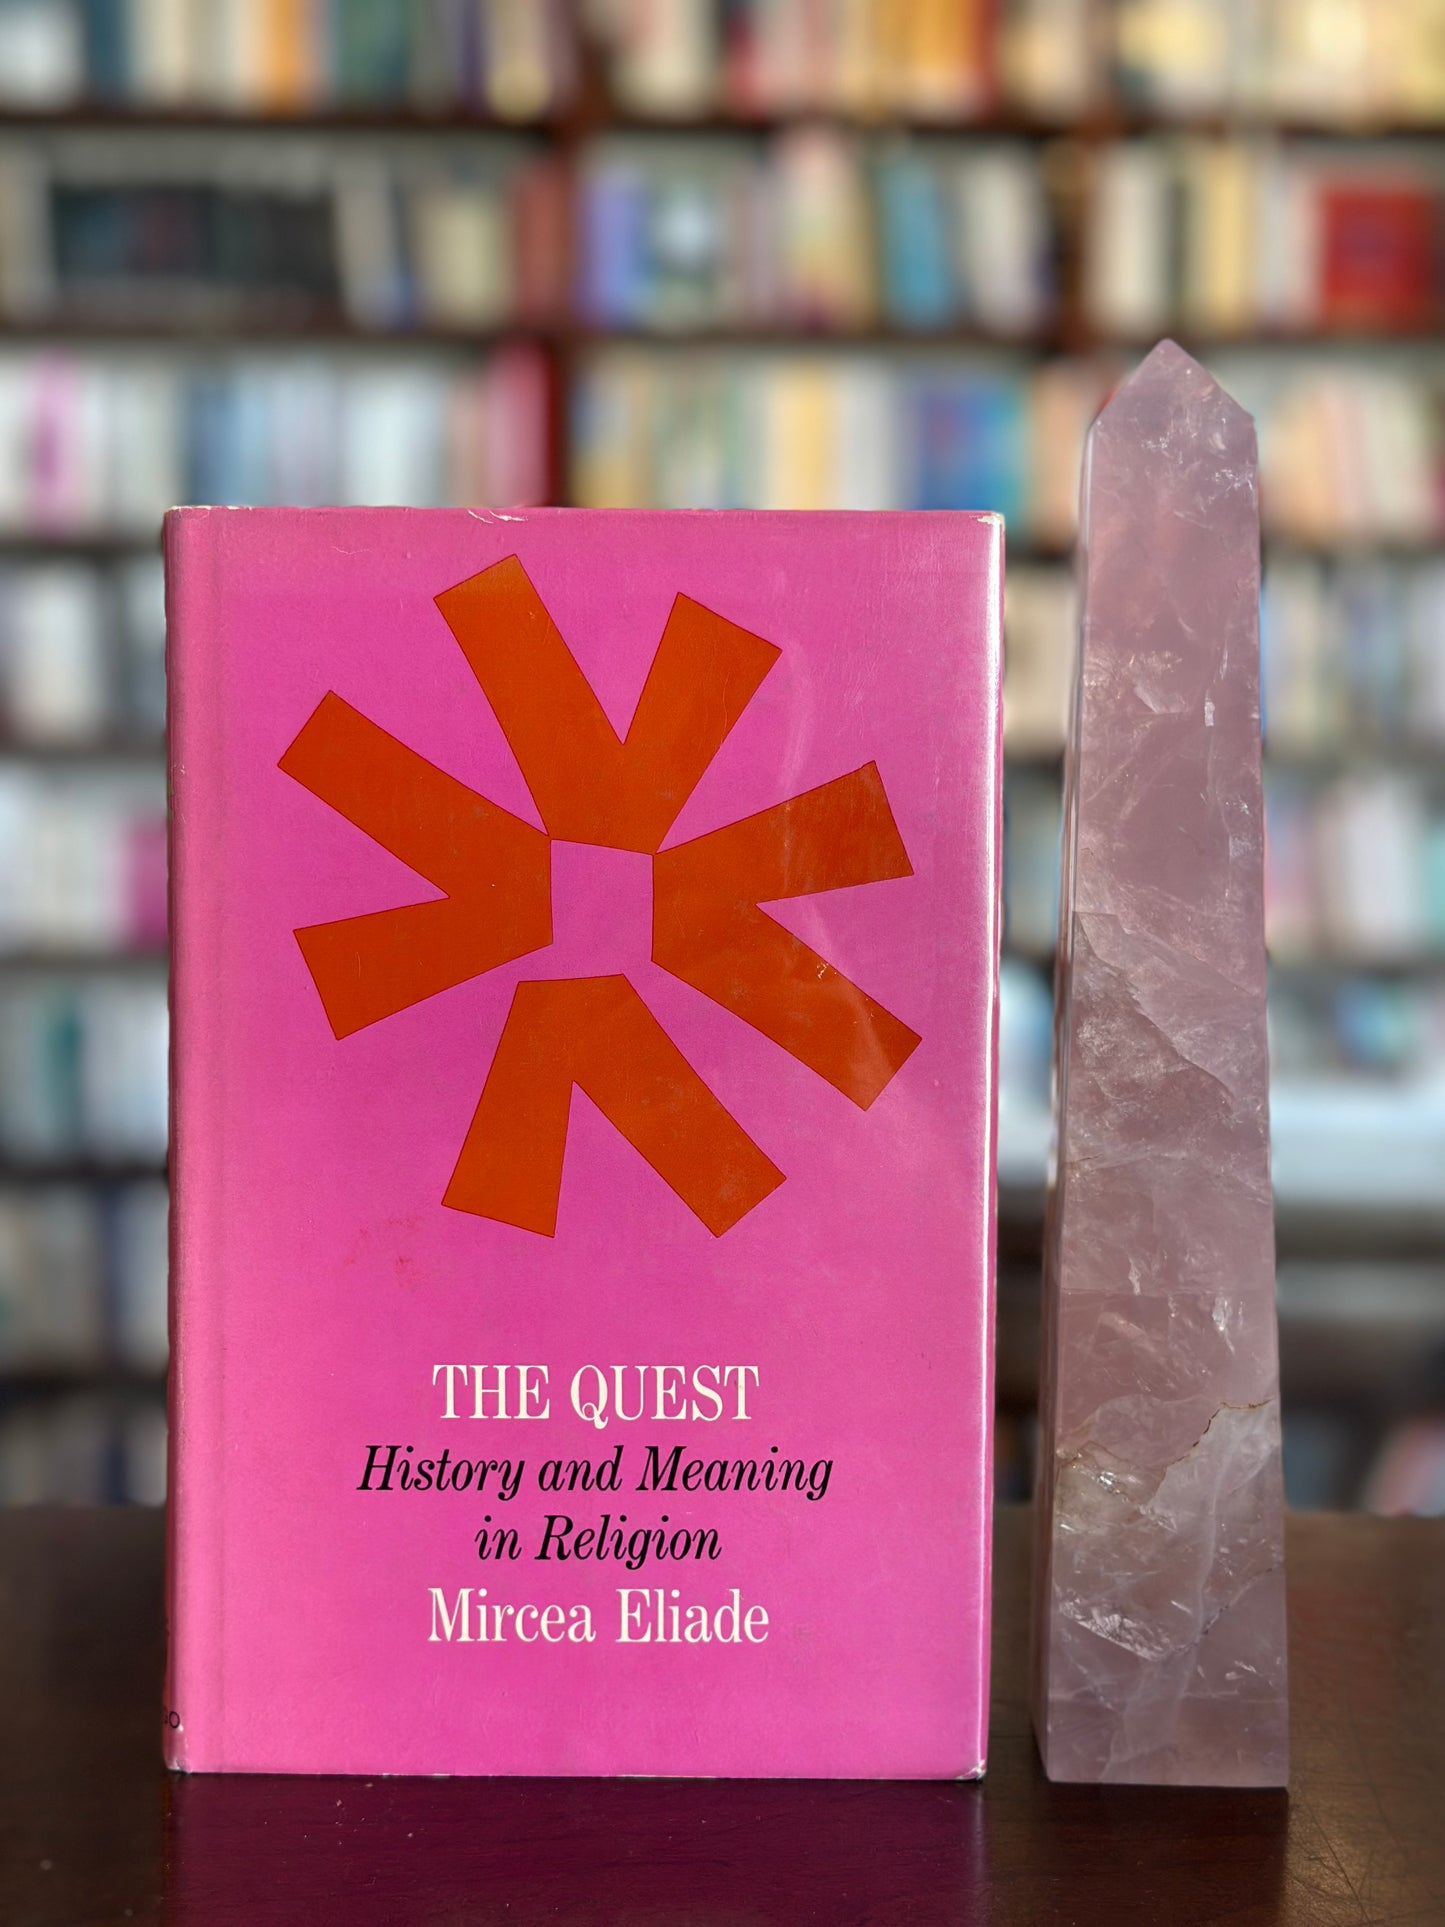 The Quest: History and Meaning in Religion by Mircea Eliade